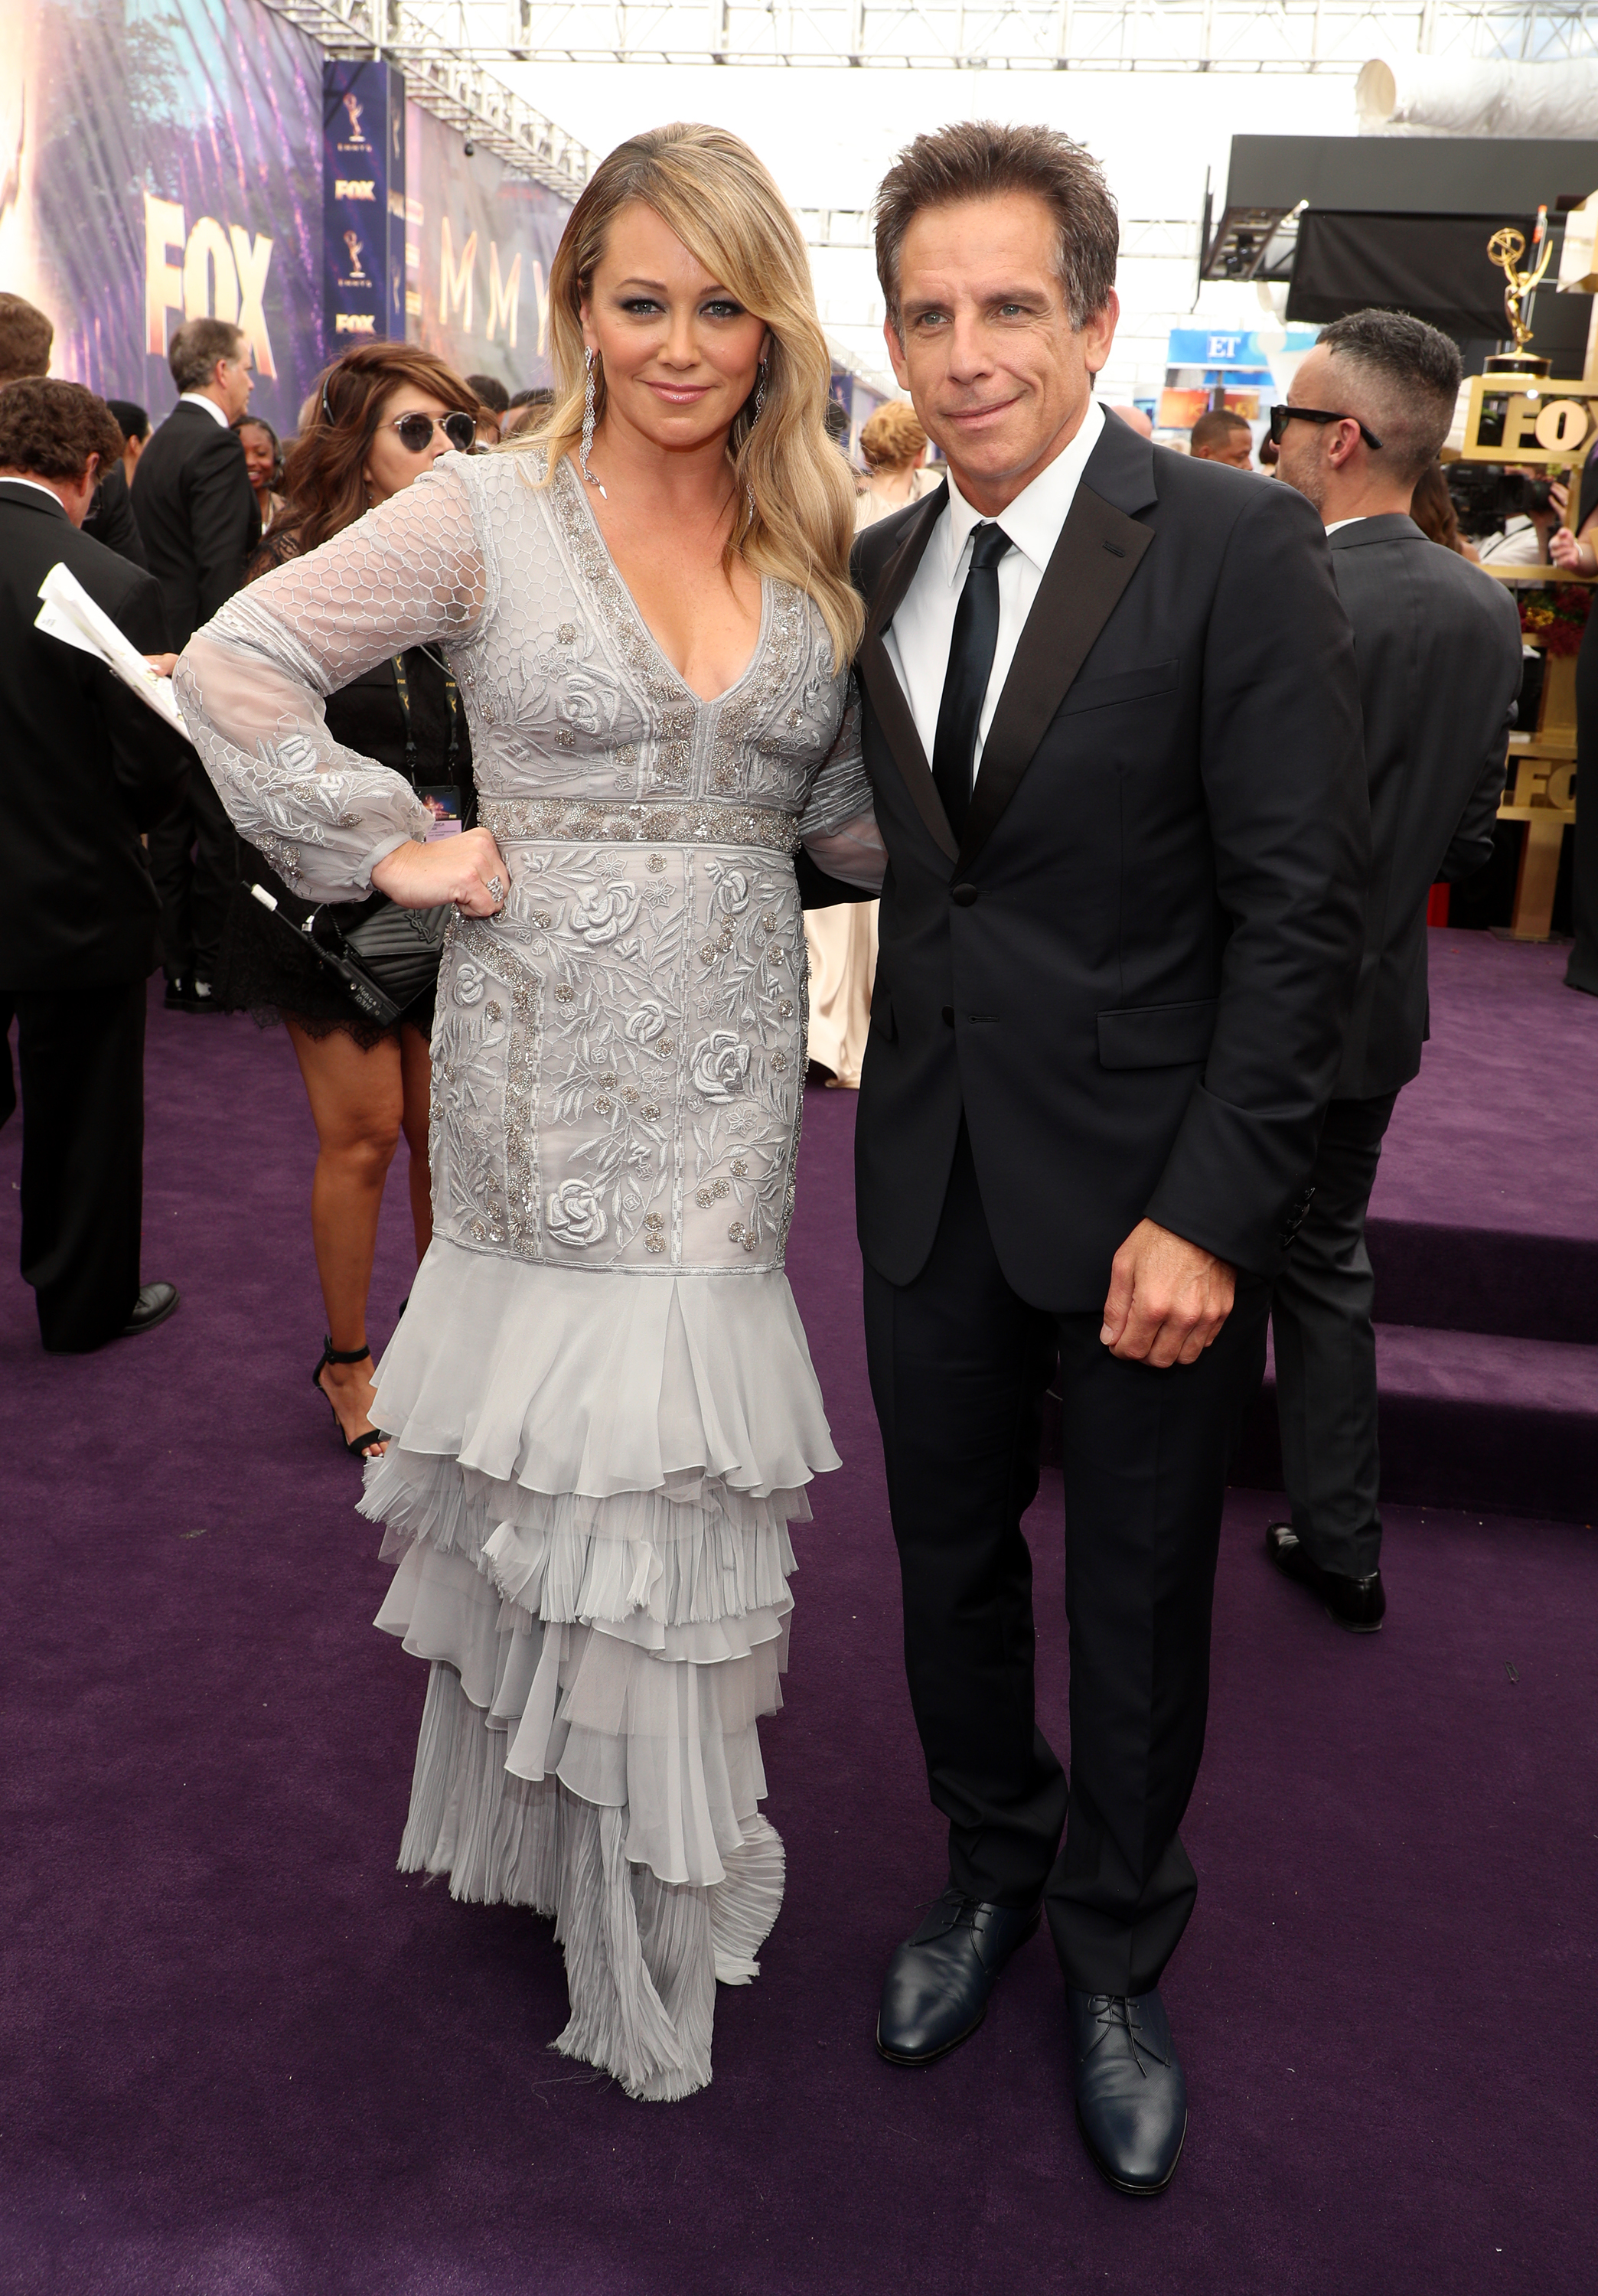 Christine Taylor and Ben Stiller attend FOXS LIVE EMMY® RED CARPET ARRIVALS during the 71ST PRIMETIME EMMY® AWARDS airing live from the Microsoft Theater at L.A. LIVE in Los Angeles